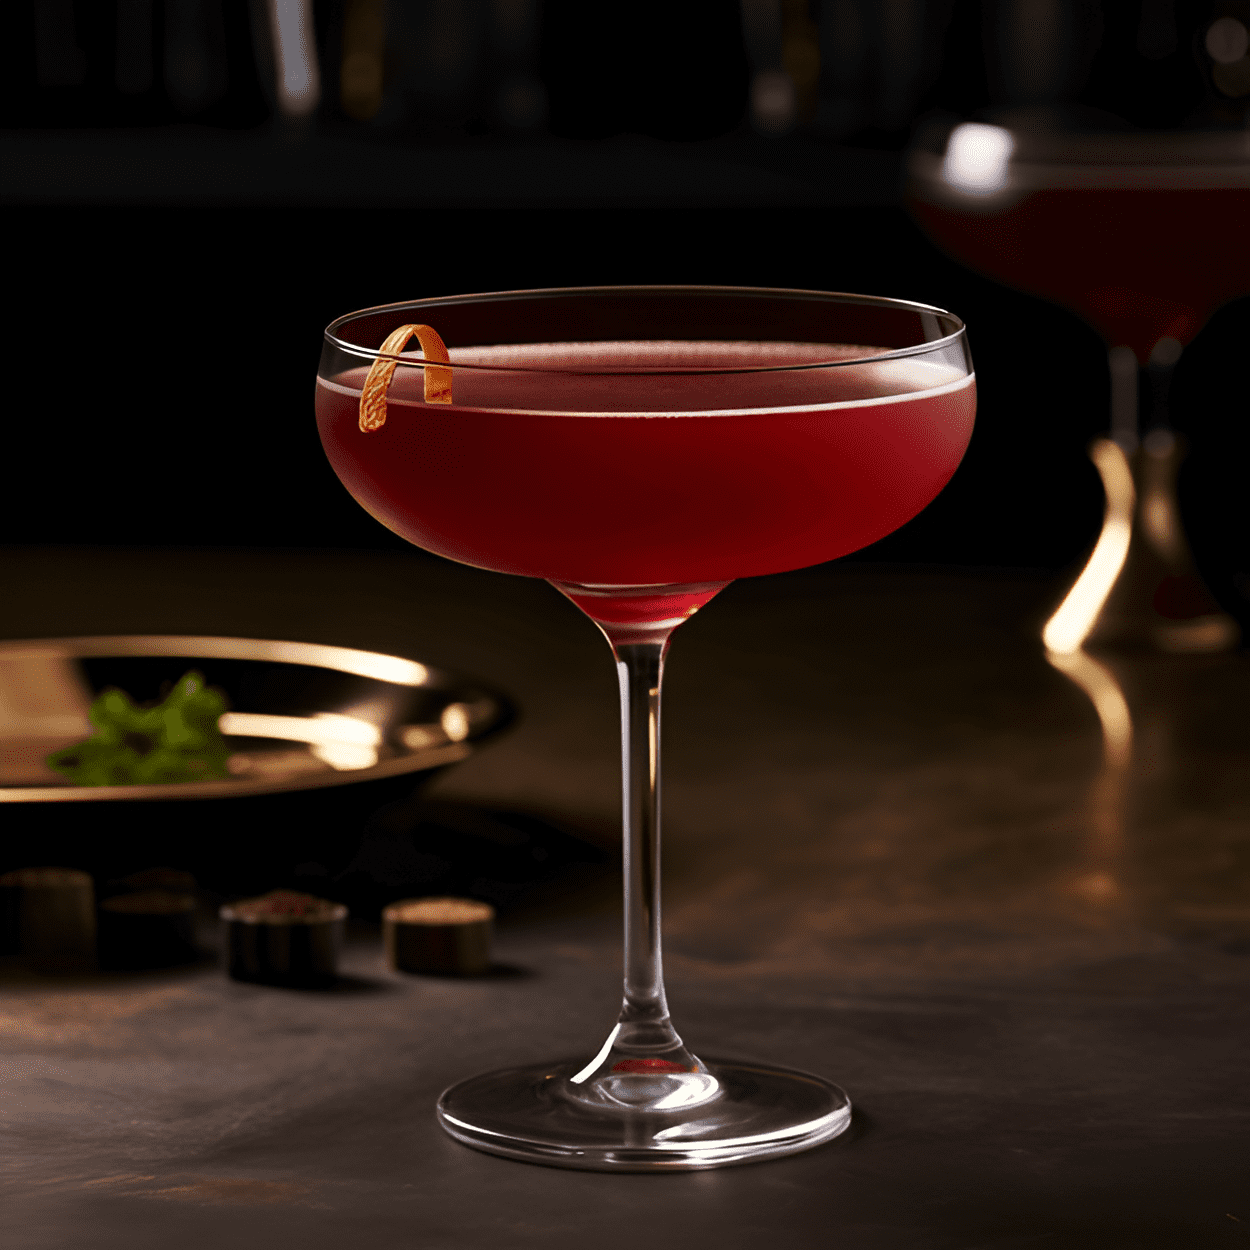 The Porto Flip is a rich, velvety, and slightly sweet cocktail with a hint of nuttiness. The flavors of the port wine and brandy blend beautifully, while the egg adds a creamy texture. The cocktail is well-balanced, with a warming finish.